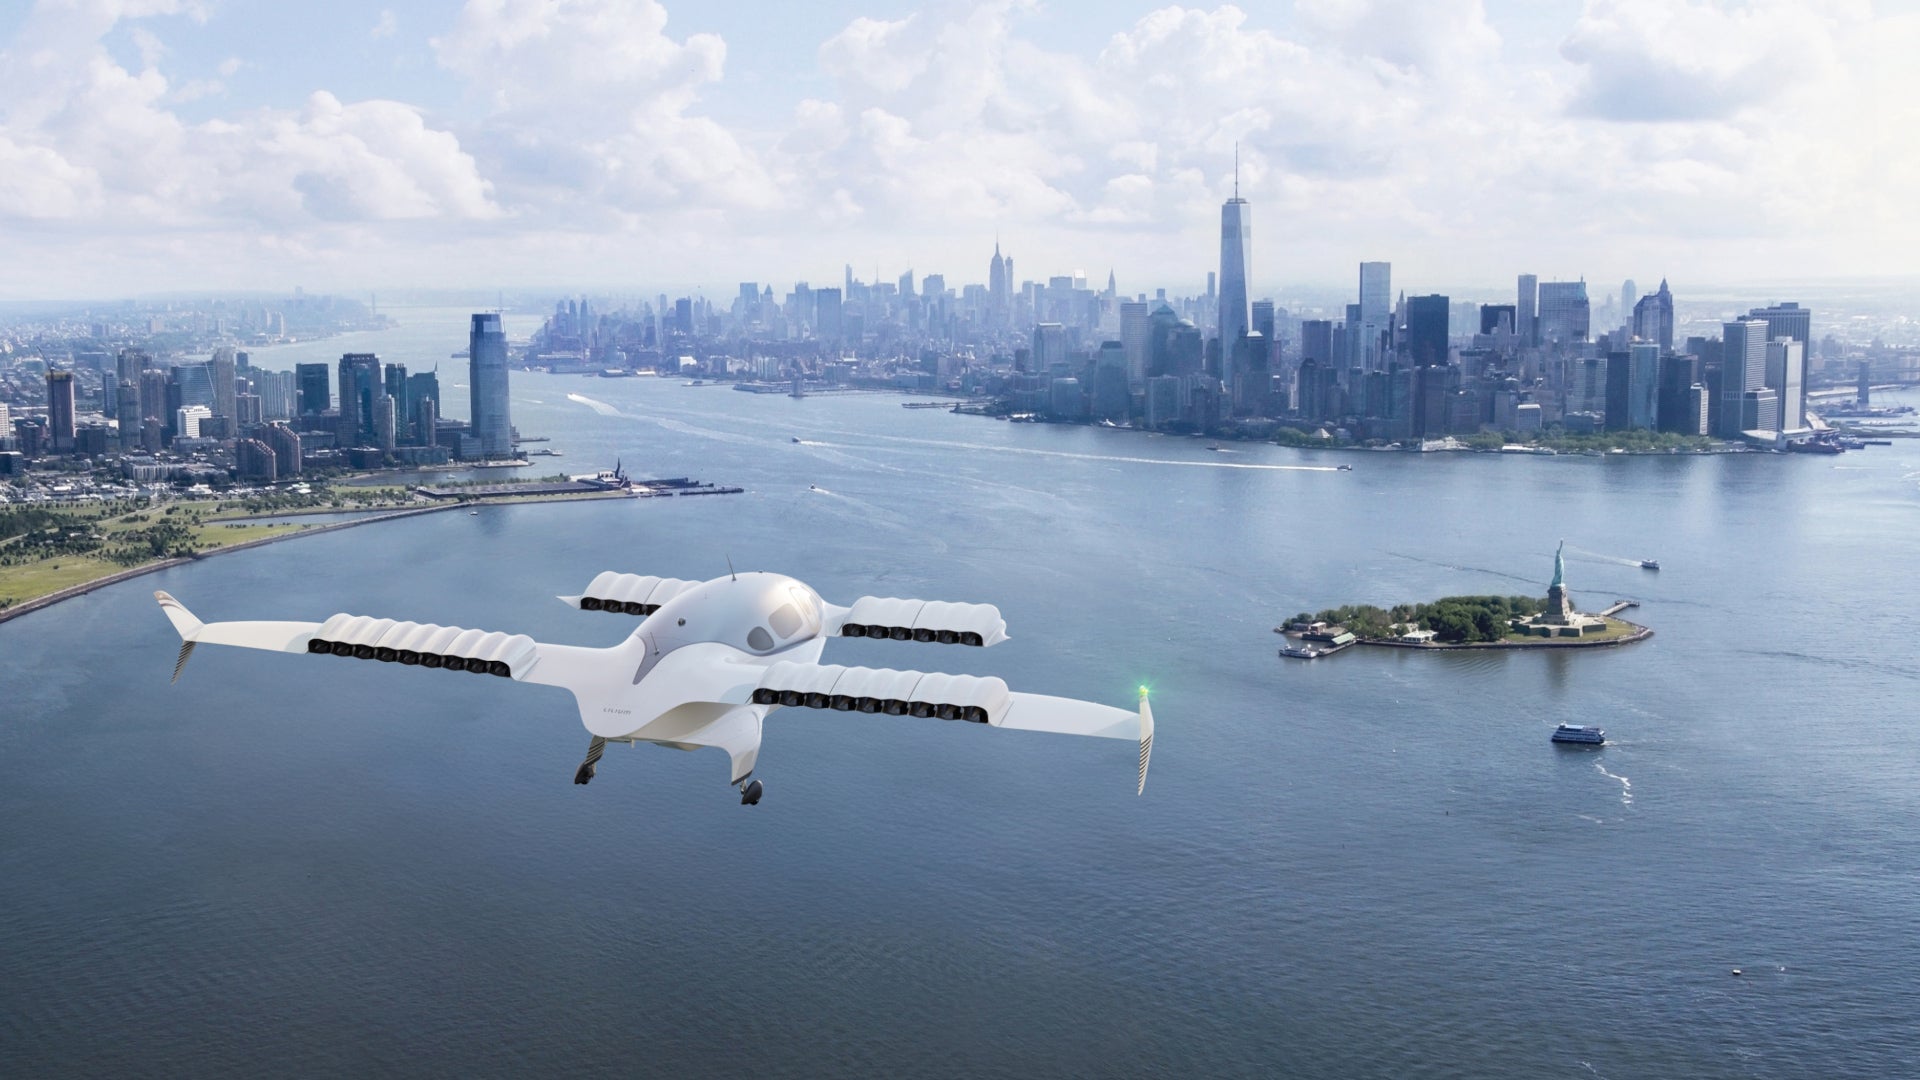 Lilium Becomes First eVTOL Manufacturer with FAA, EASA Certification Bases